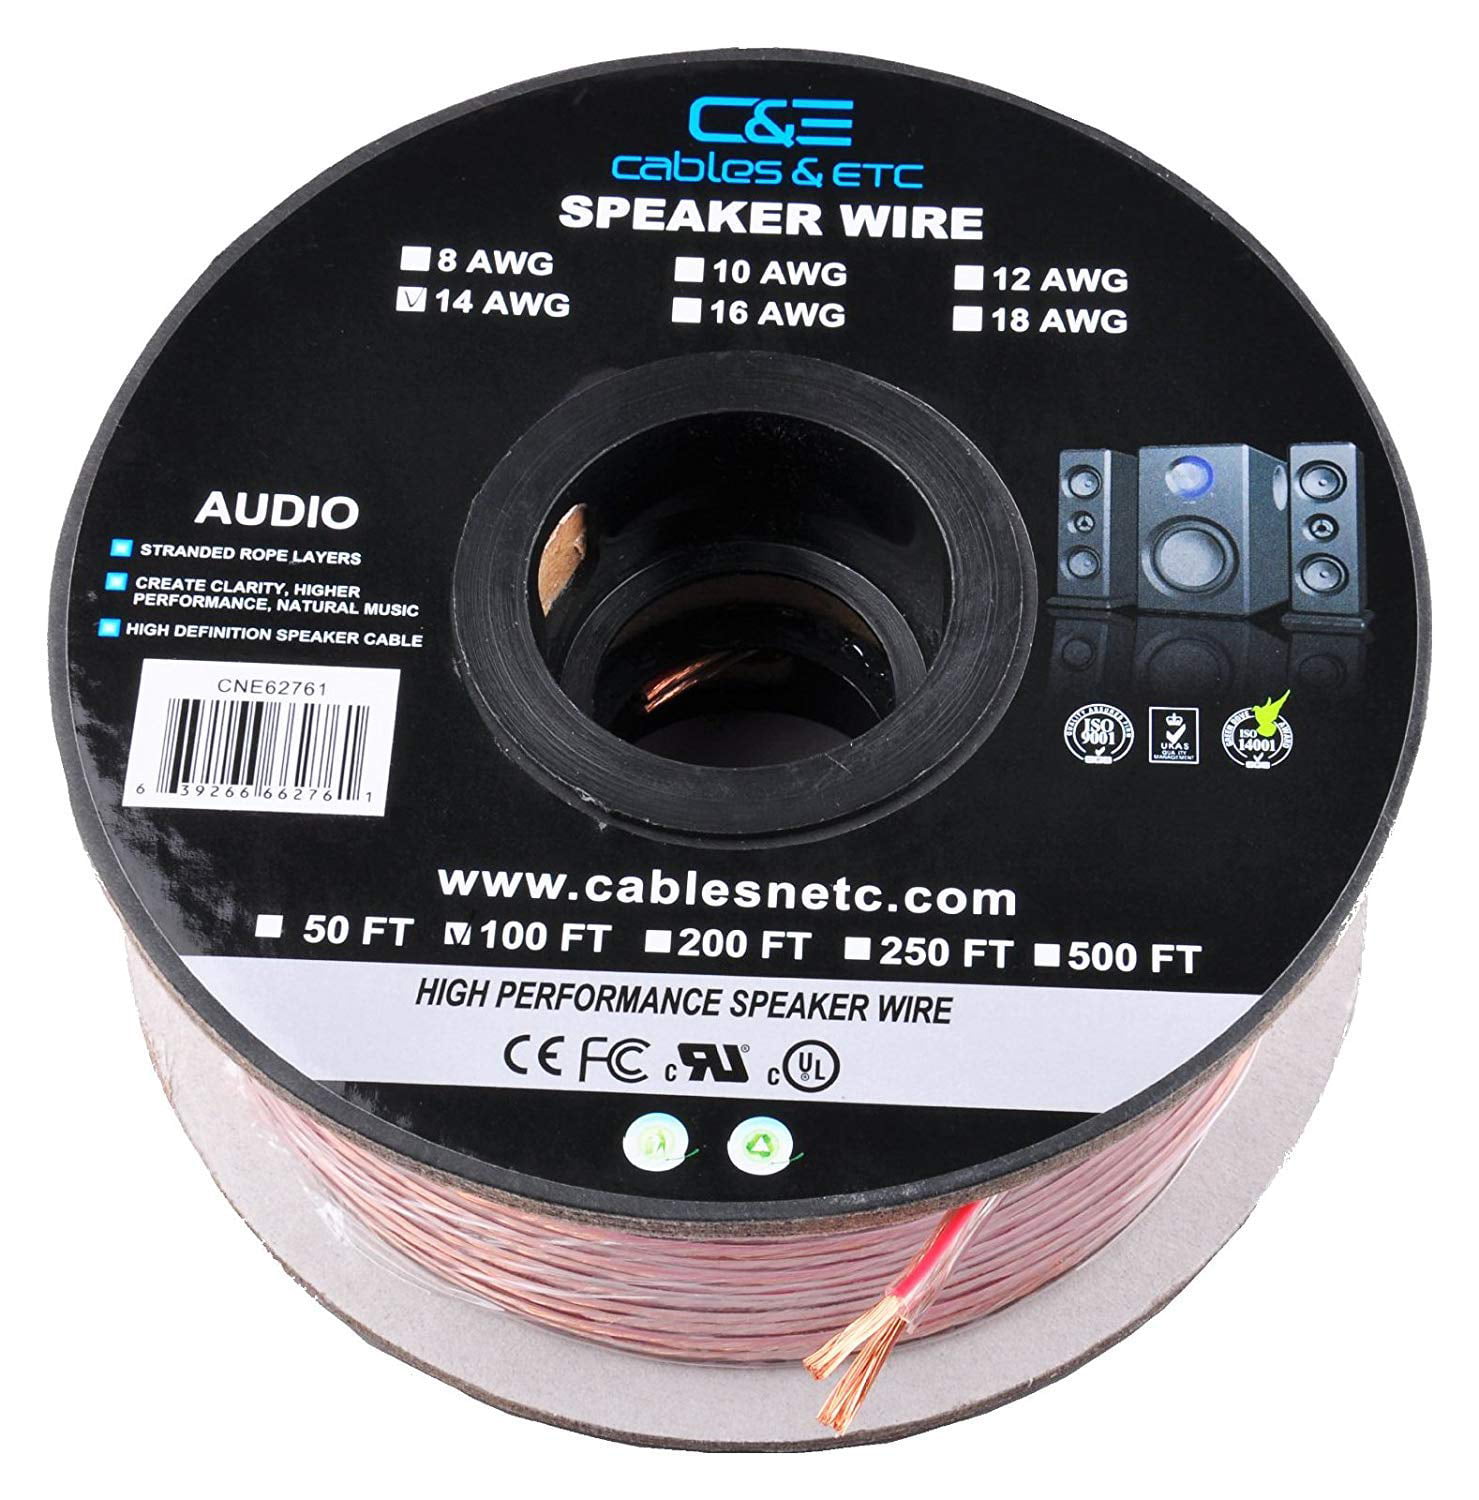 100 Feet / 30 Meter 100ft Great Use for Home Theater Speakers and Car Speakers 30m Pro Series 14 Gauge AWG 99.9% Oxygen Free Copper Speaker Wire Cable with Clear PVC Jacket & Polarity Stripe 